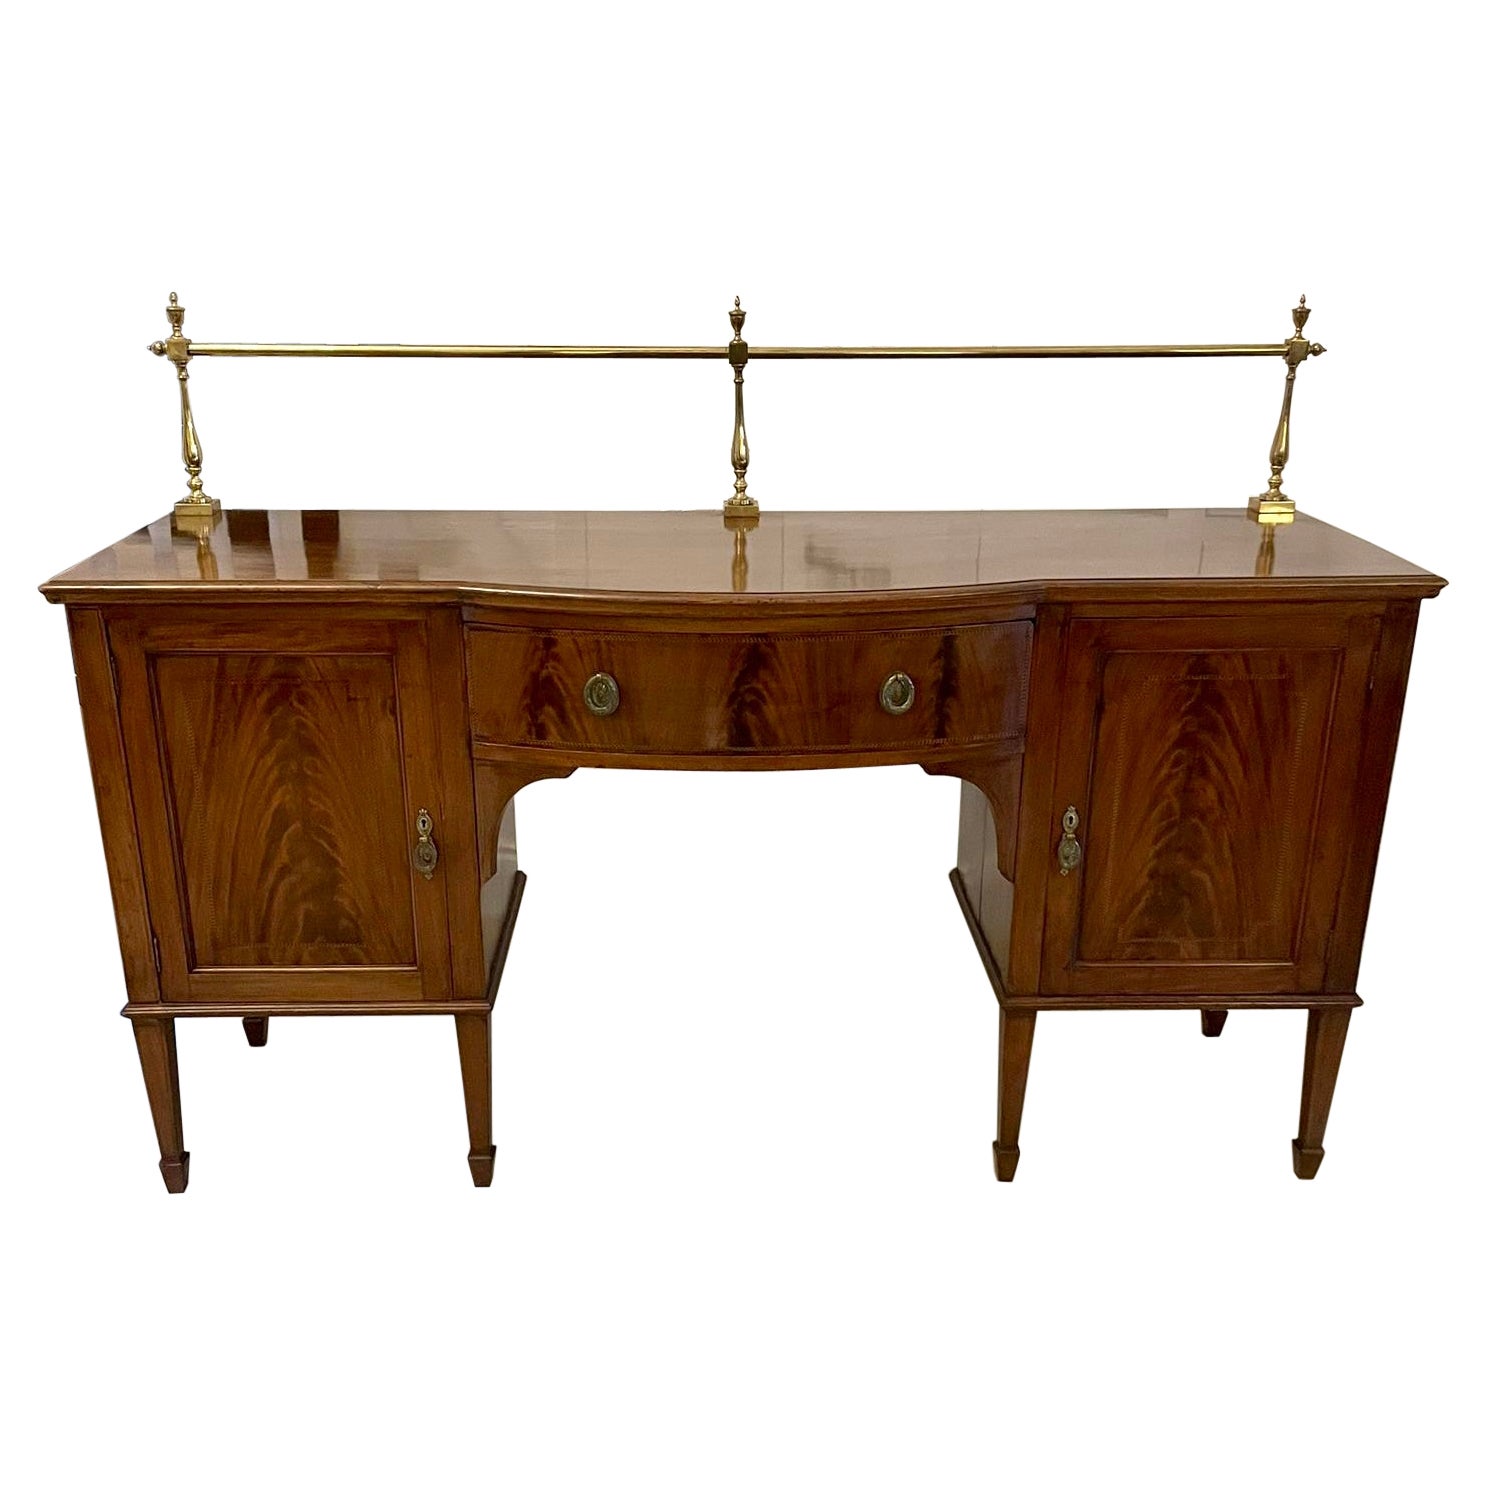 Antique Edwardian Mahogany Inlaid Sideboard by Hamptons and Sons For Sale